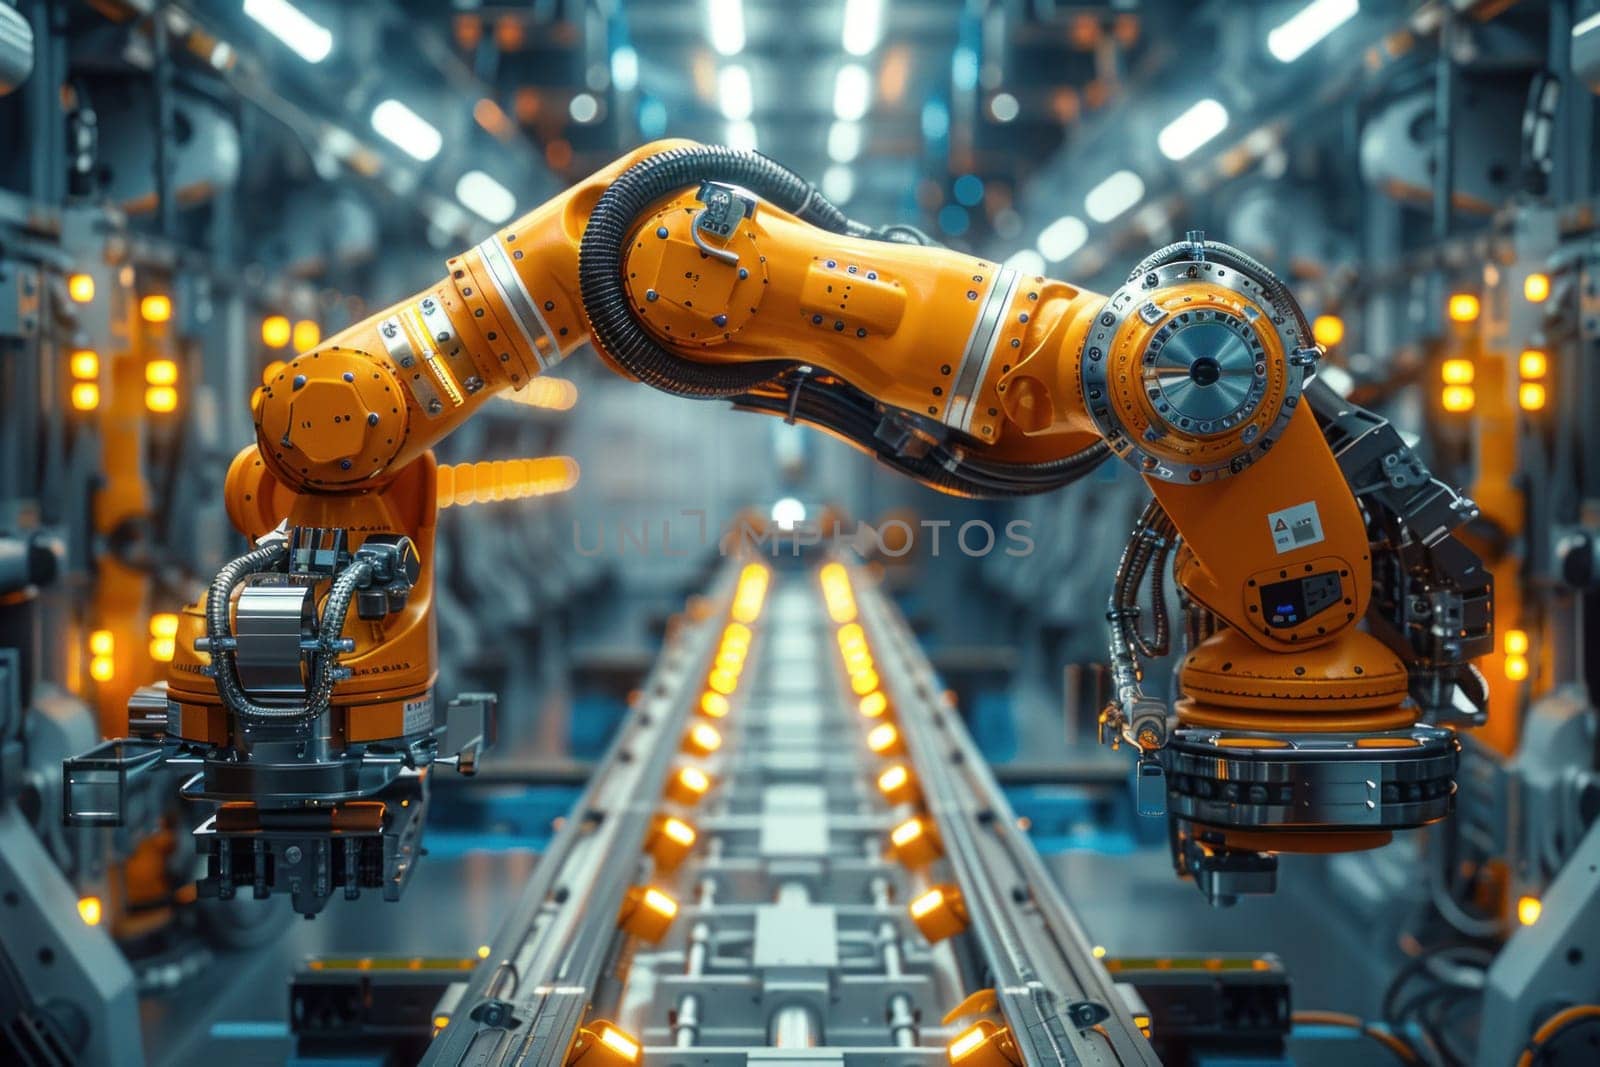 Robotic Arm Moving on Conveyor Belt by but_photo